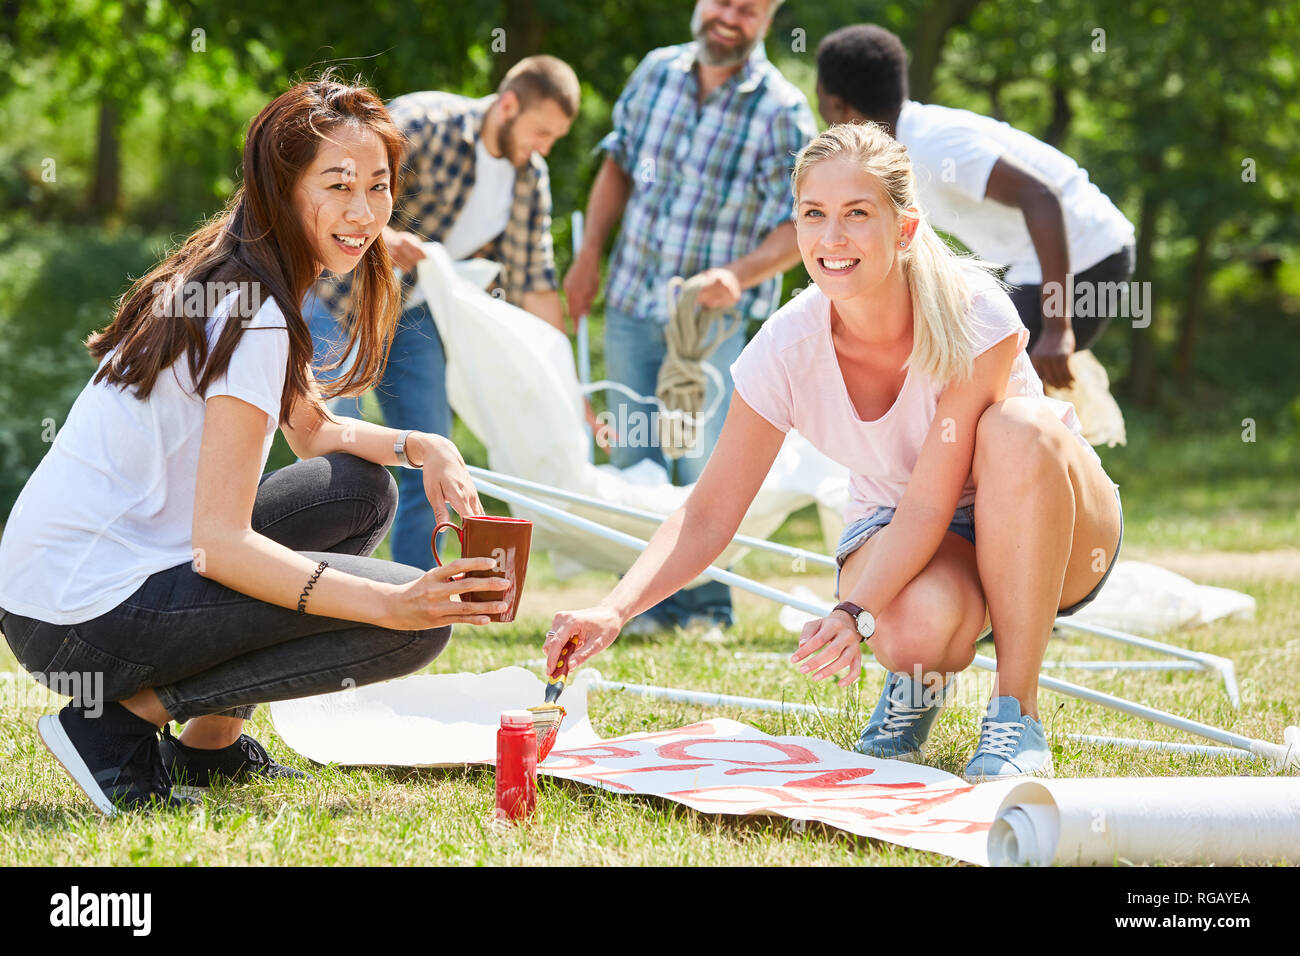 Two young women volunteering activists paint a poster together in the park Stock Photo